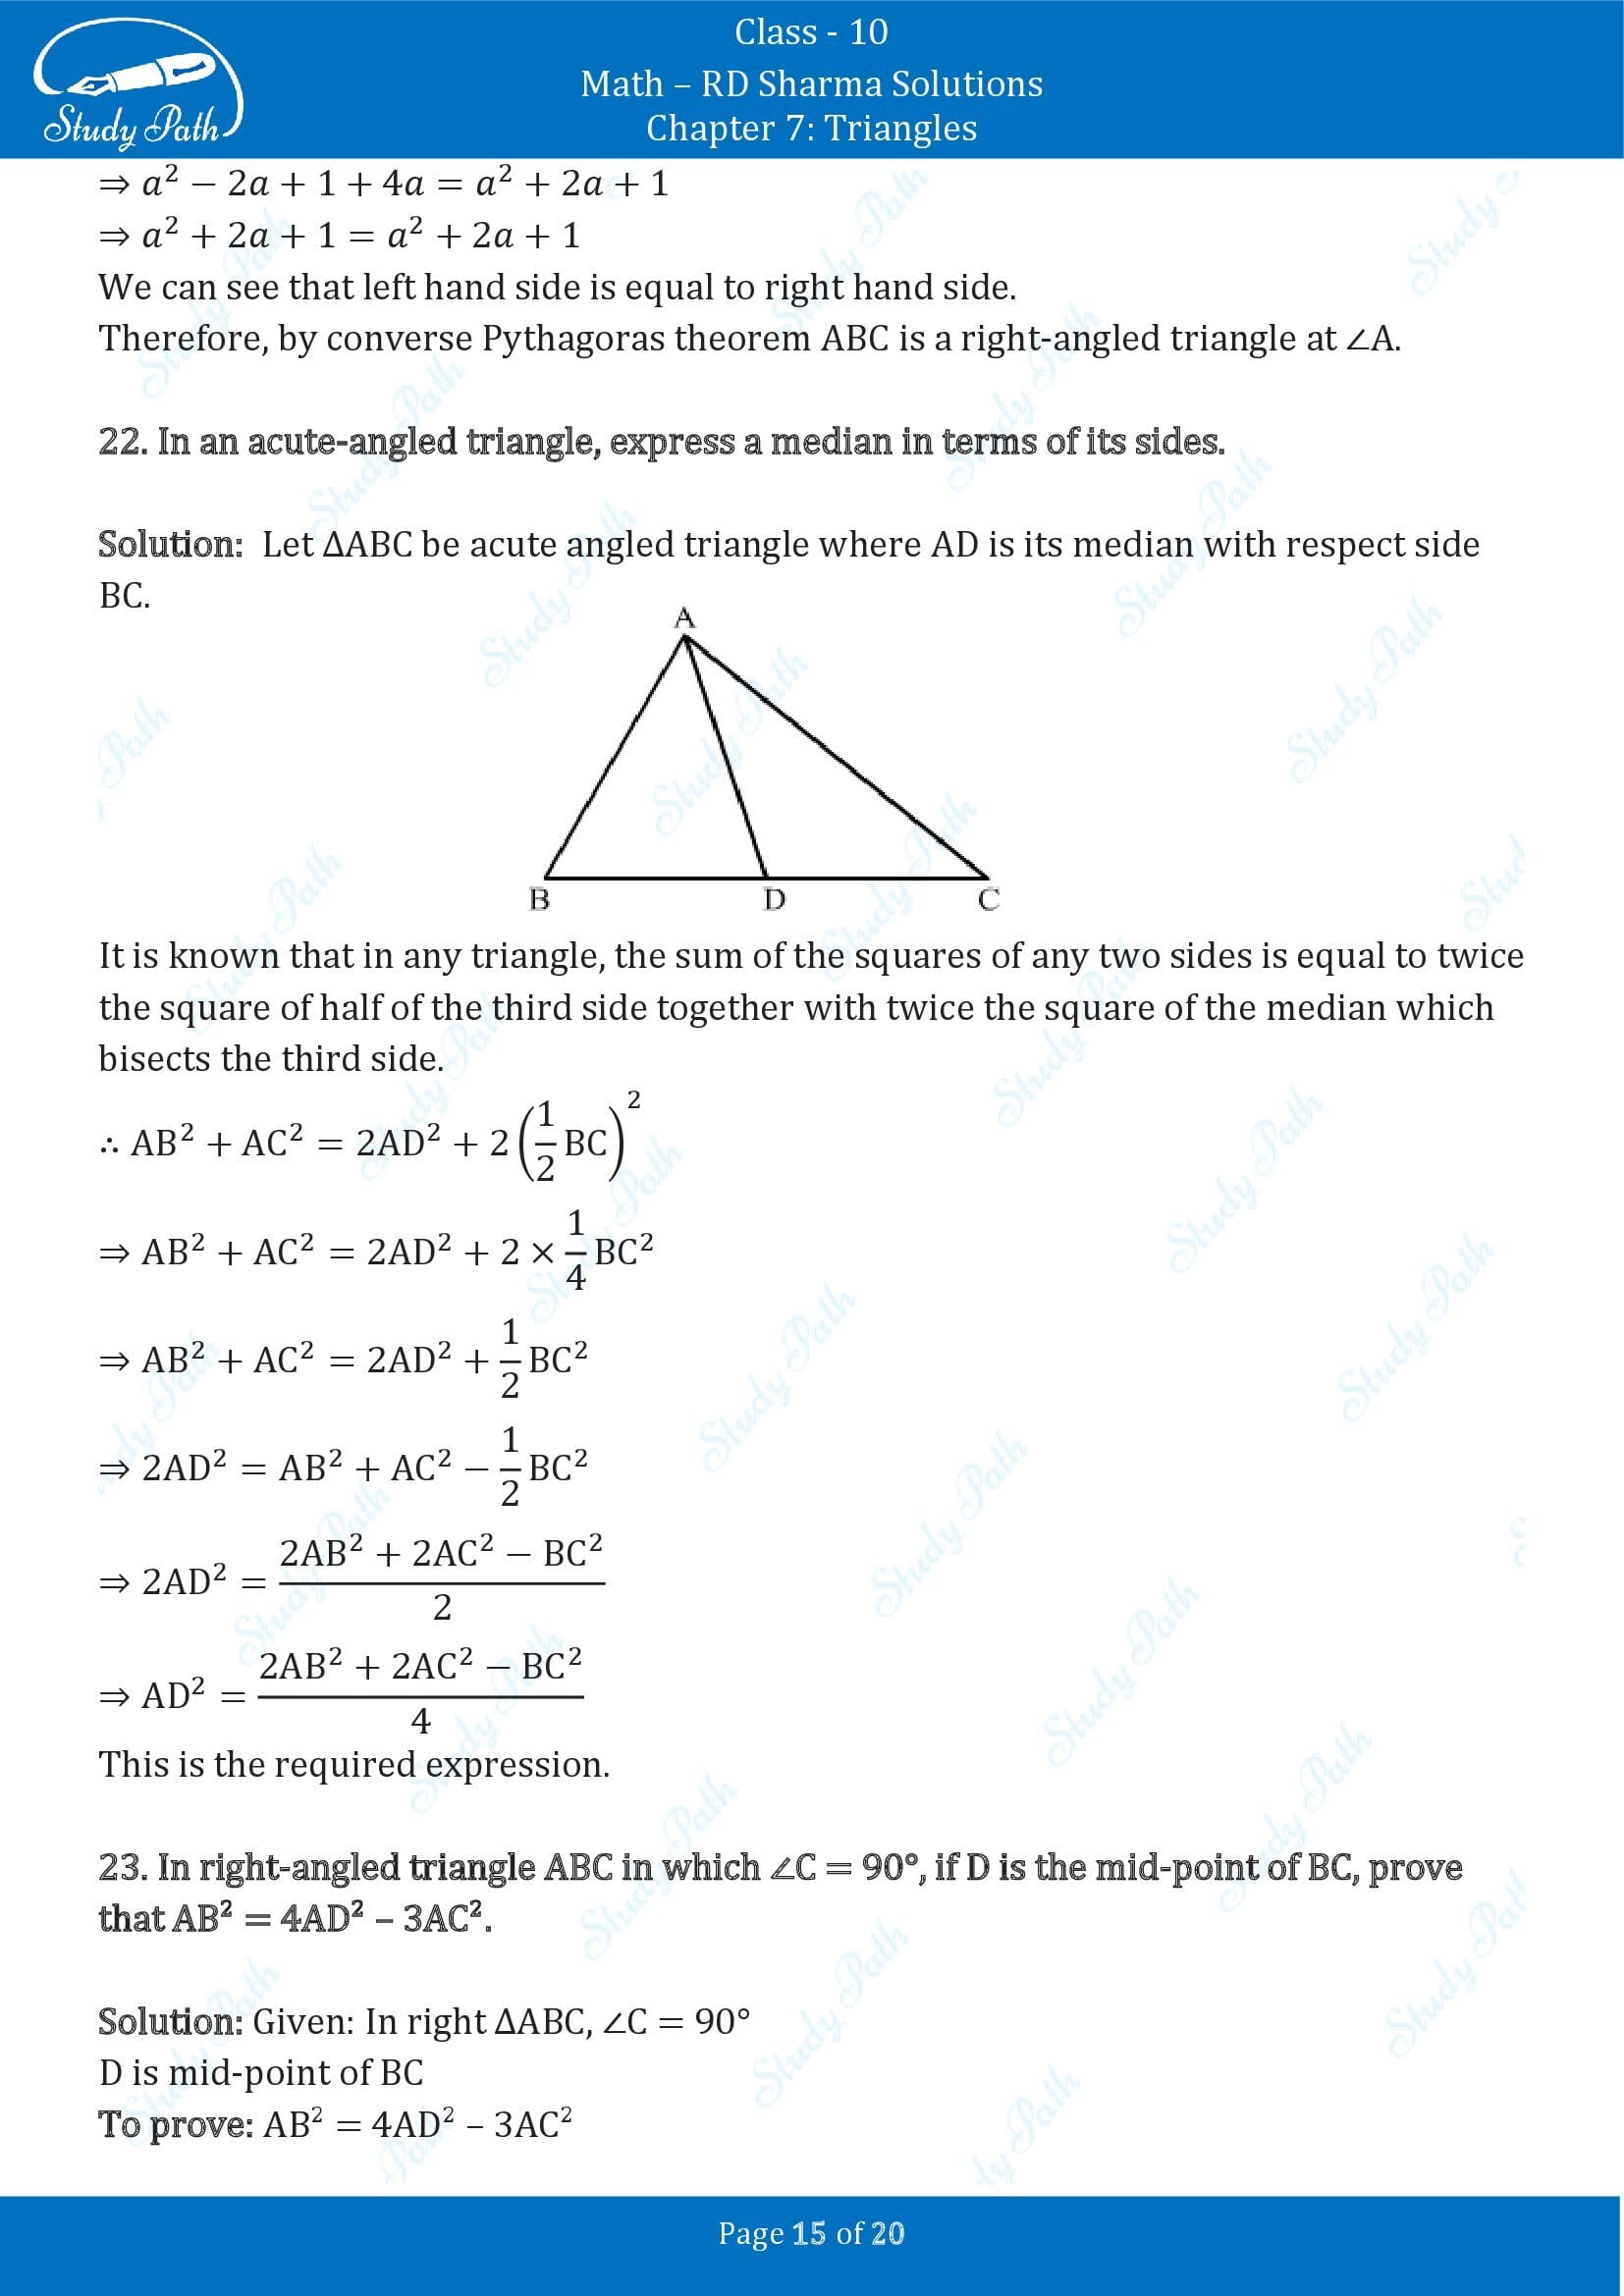 RD Sharma Solutions Class 10 Chapter 7 Triangles Exercise 7.7 00015